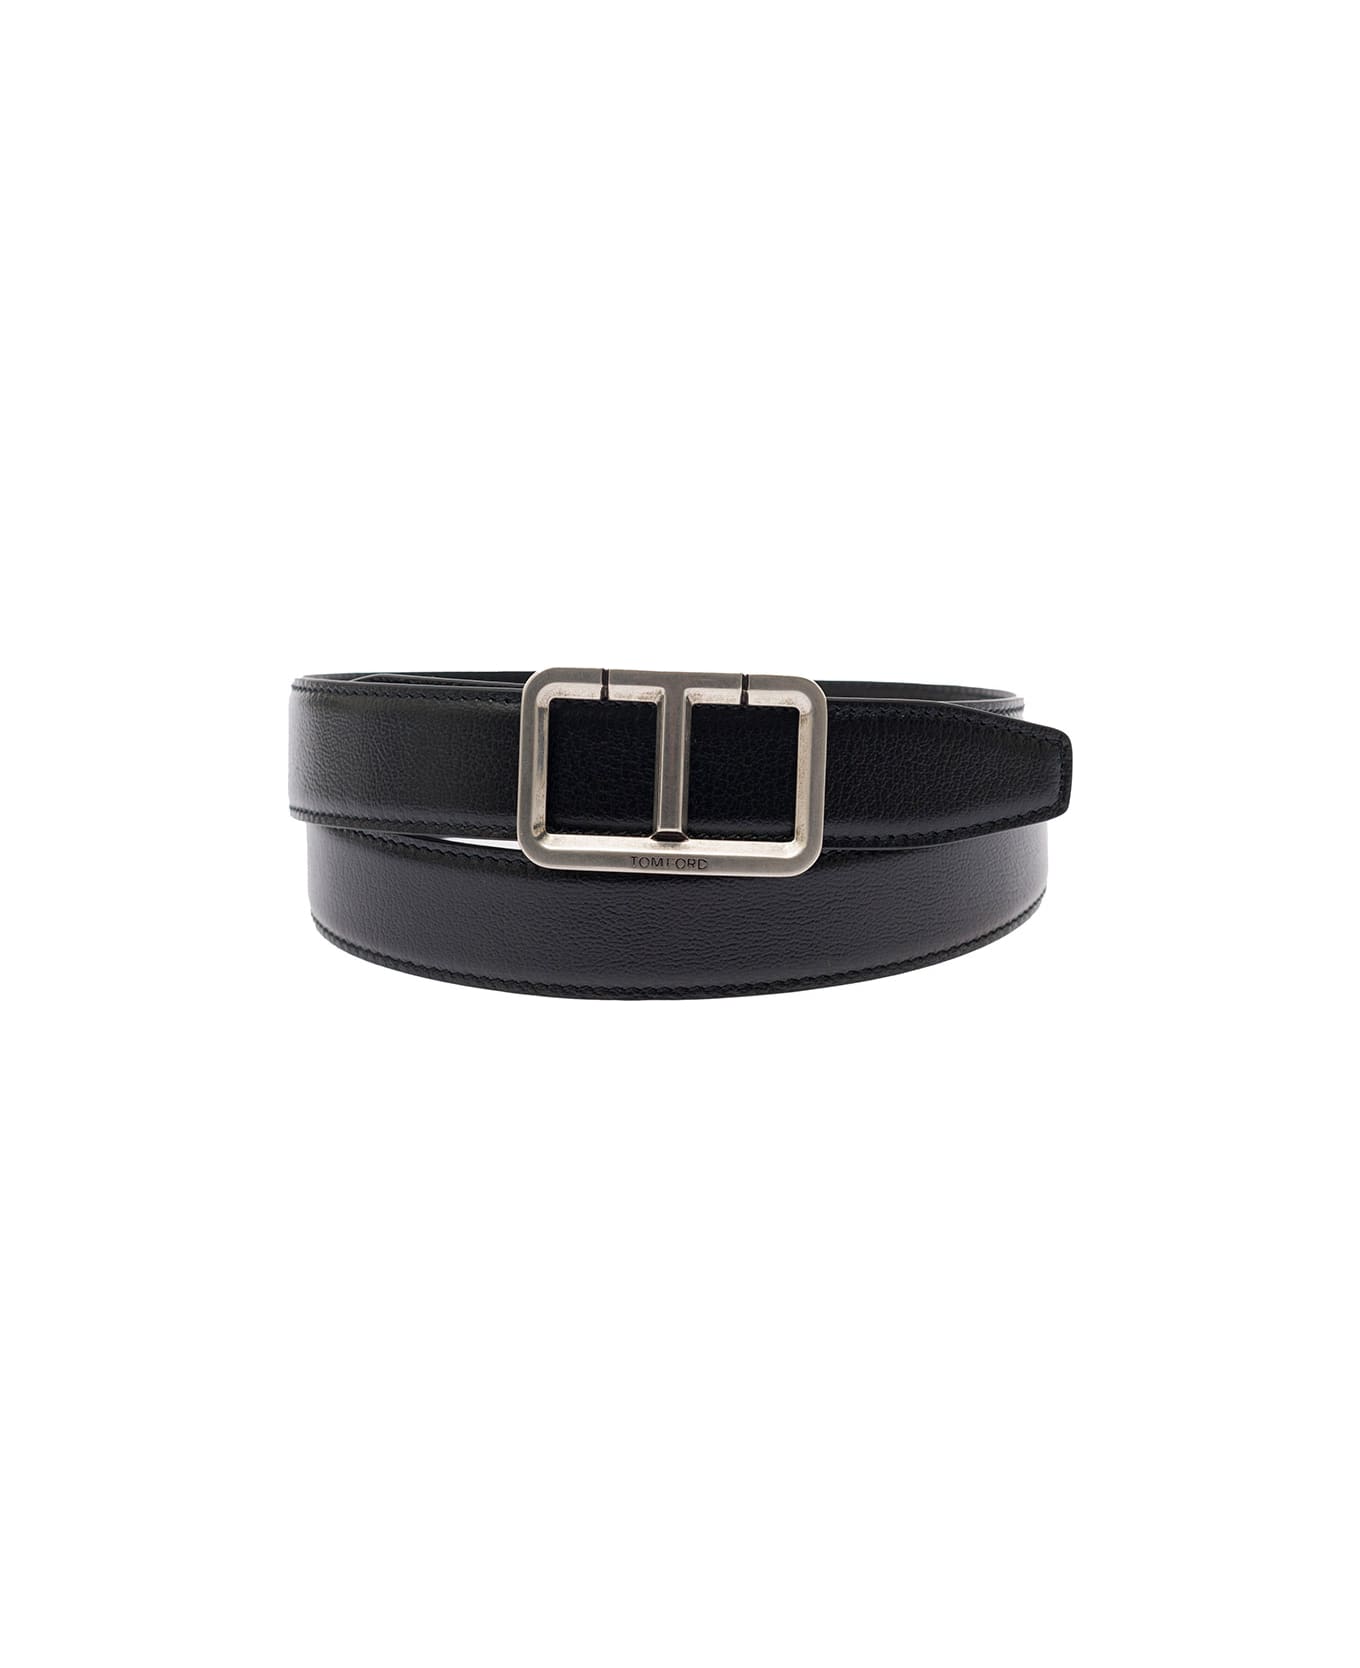 Tom Ford Black Belt With T Buckle In Smooth Leather Man - Black